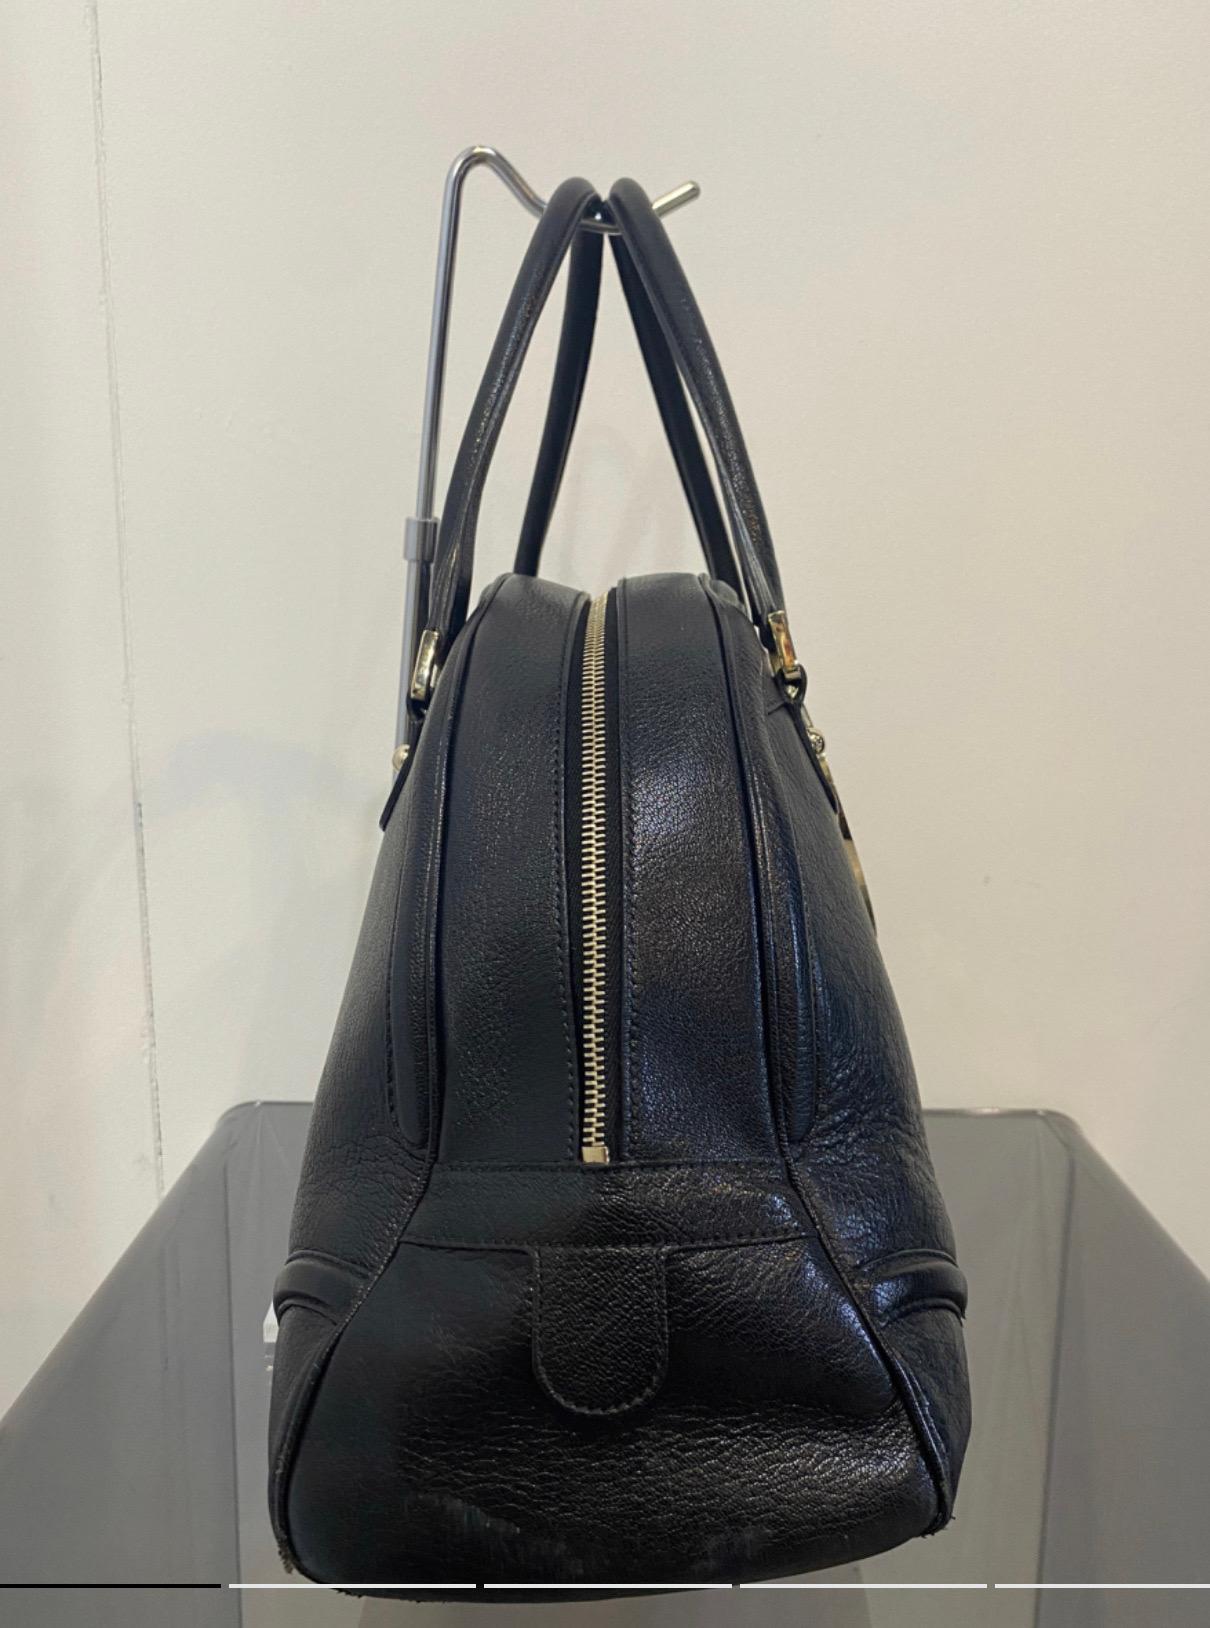 Gucci Blondie bag. in black leather with pink logo.
measurements:
height 26 cm
length 43 cm 
Width 17 cm
handles 13 cm
one corner is slightly damaged as shown in the photo. excellent general conditions.